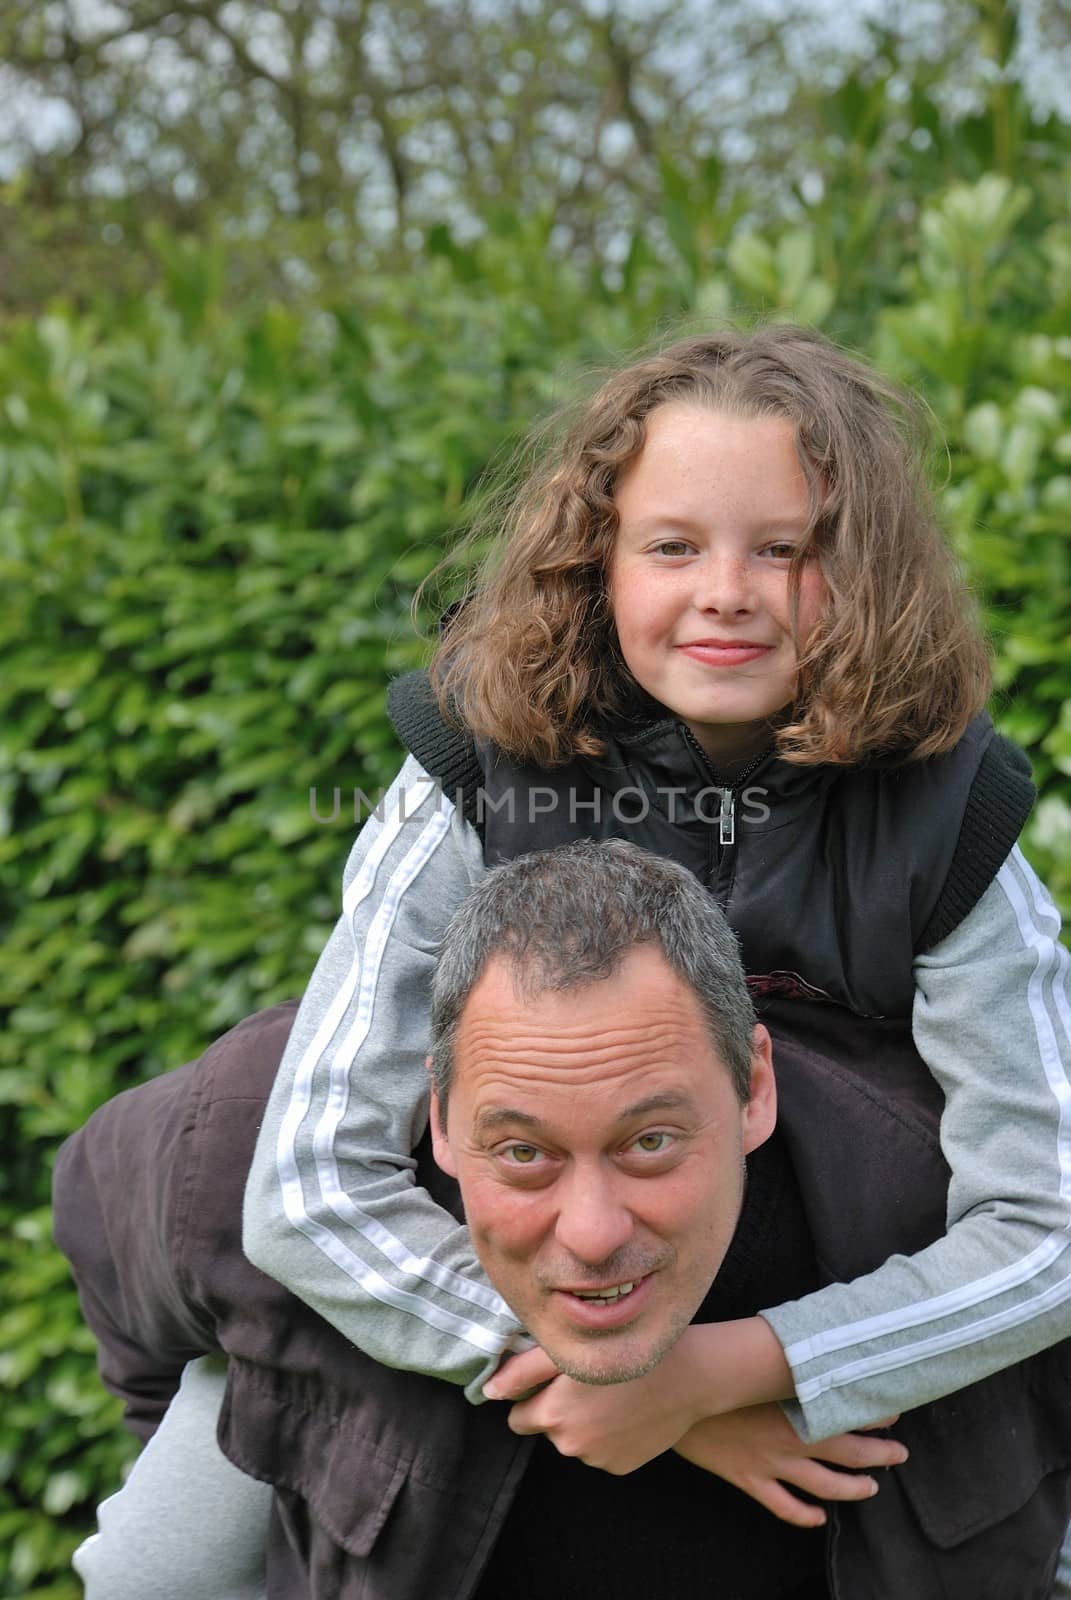 Complicity between father and daughter